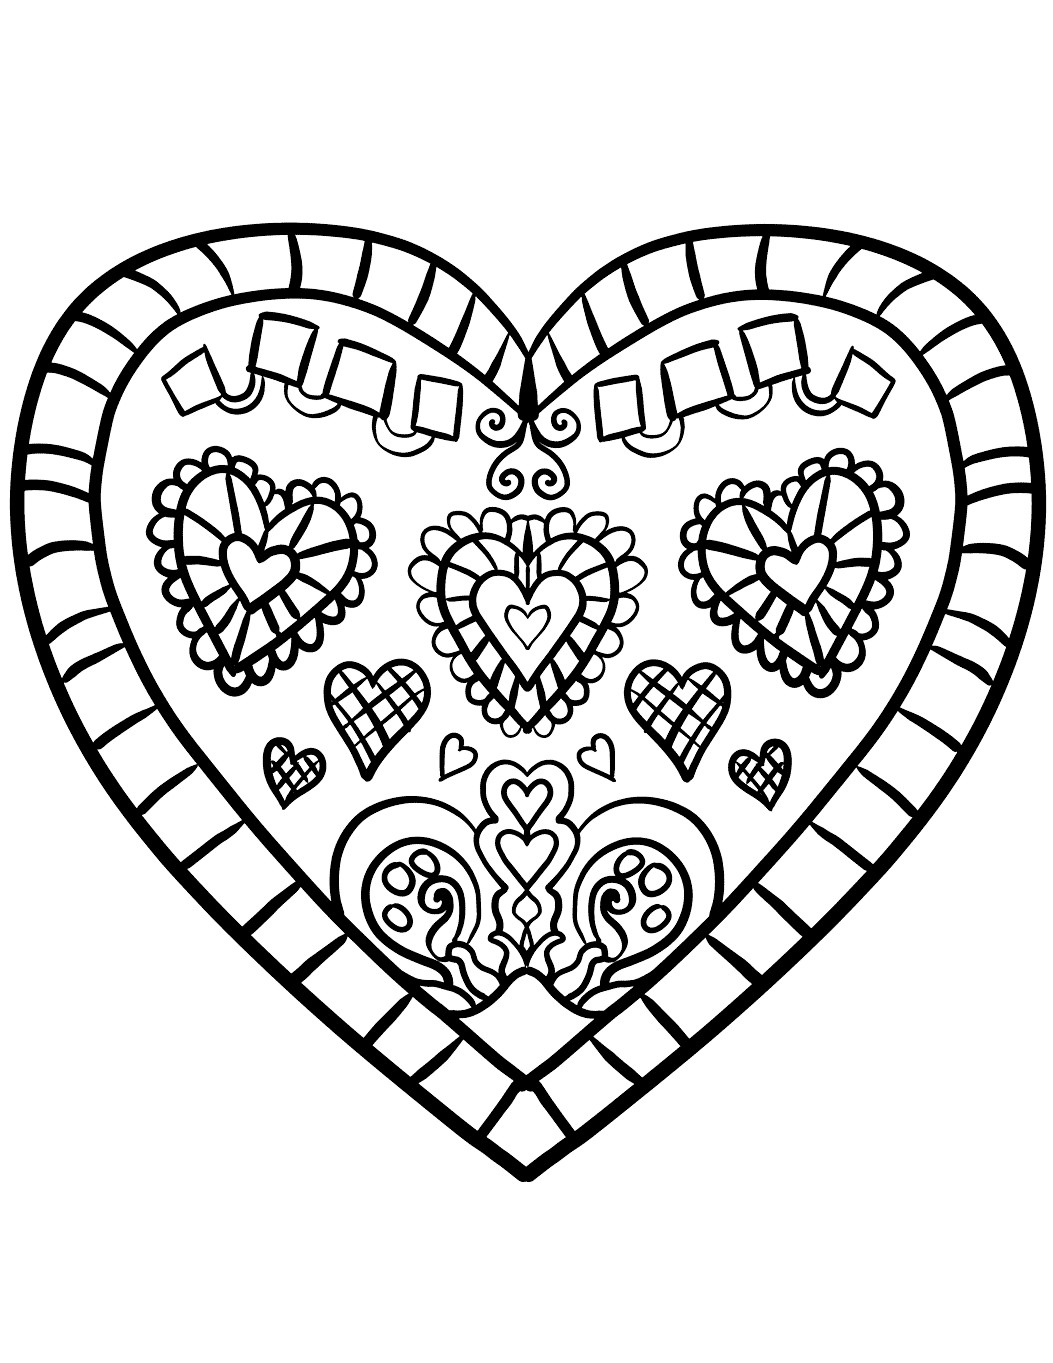 Printable Heart Coloring Pages
 Hearts Coloring Pages for Adults Best Coloring Pages For